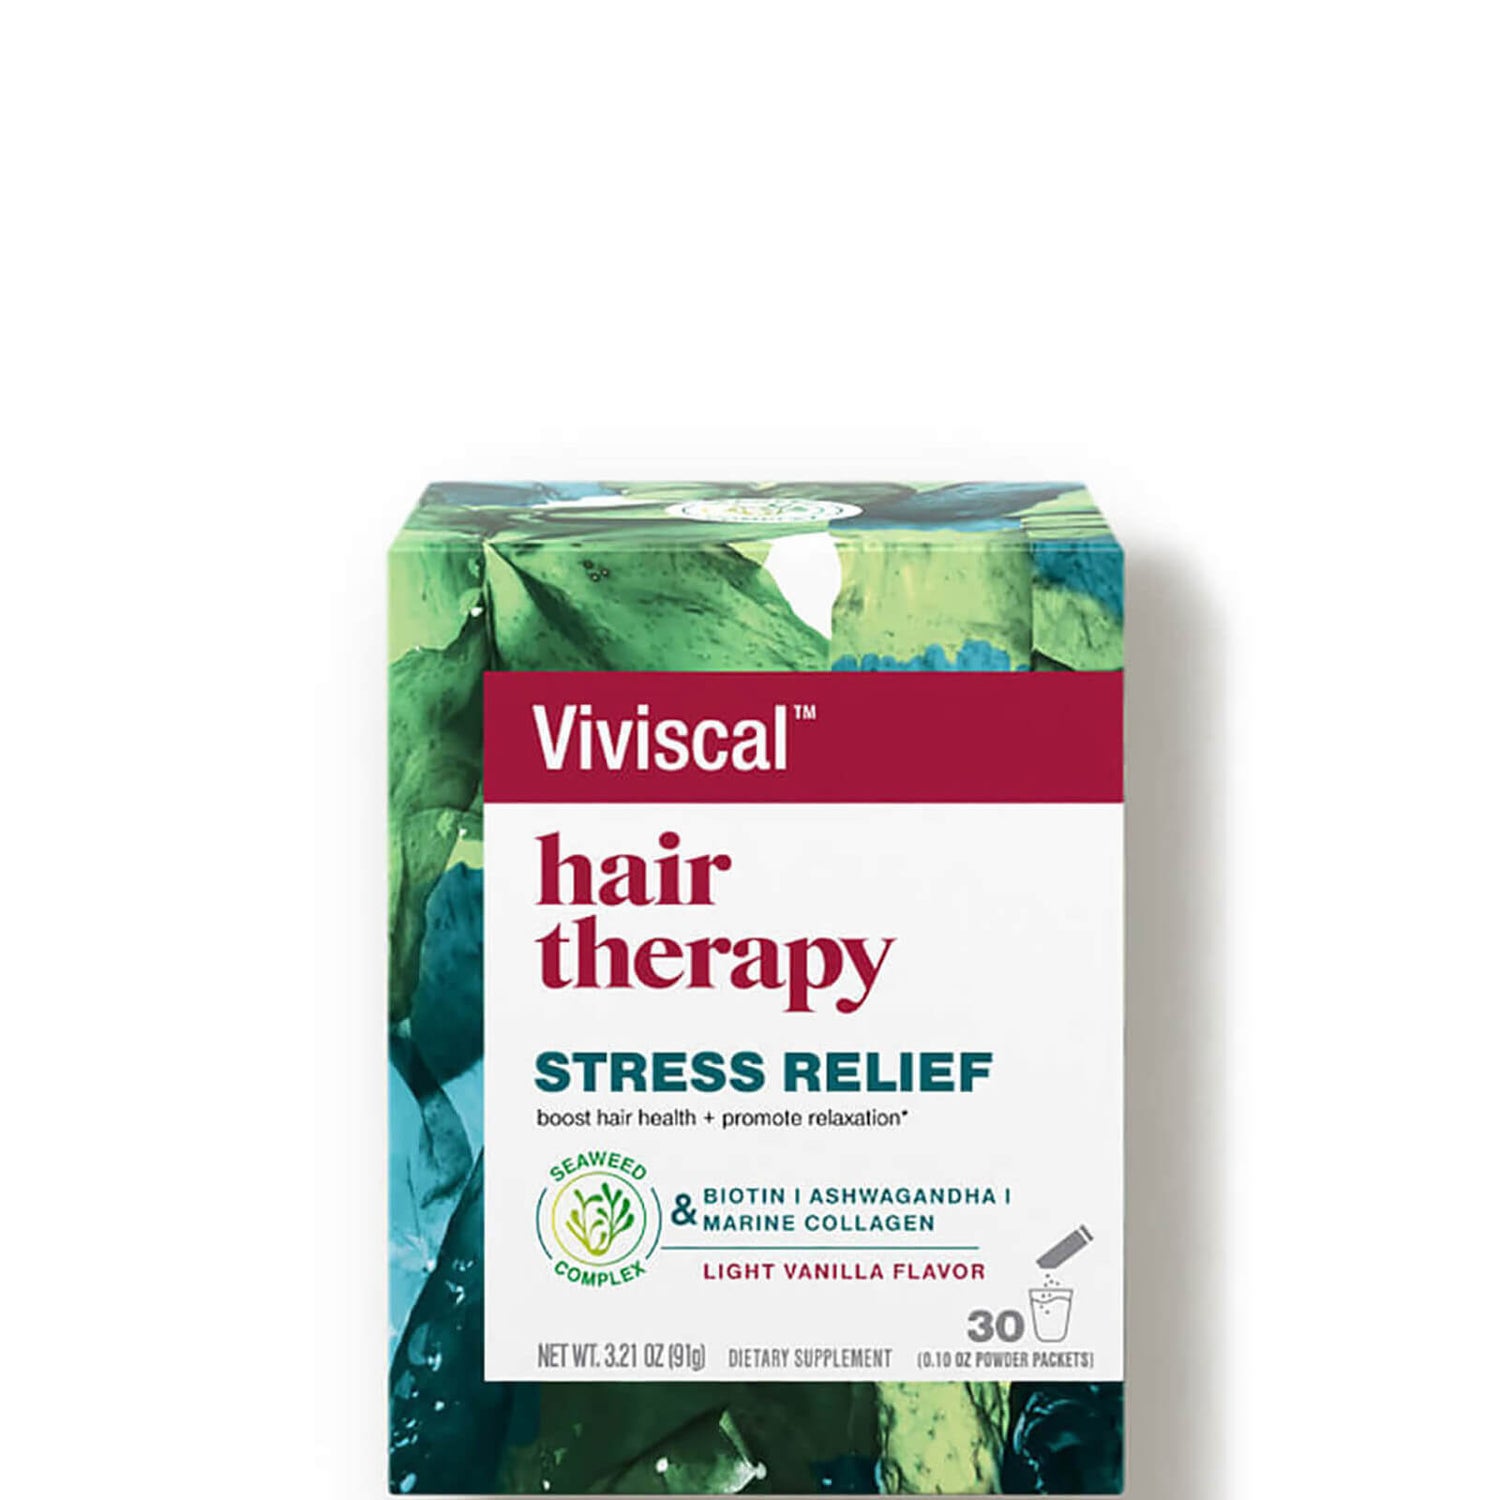 Viviscal Hair Therapy Stress Relief (30 count)